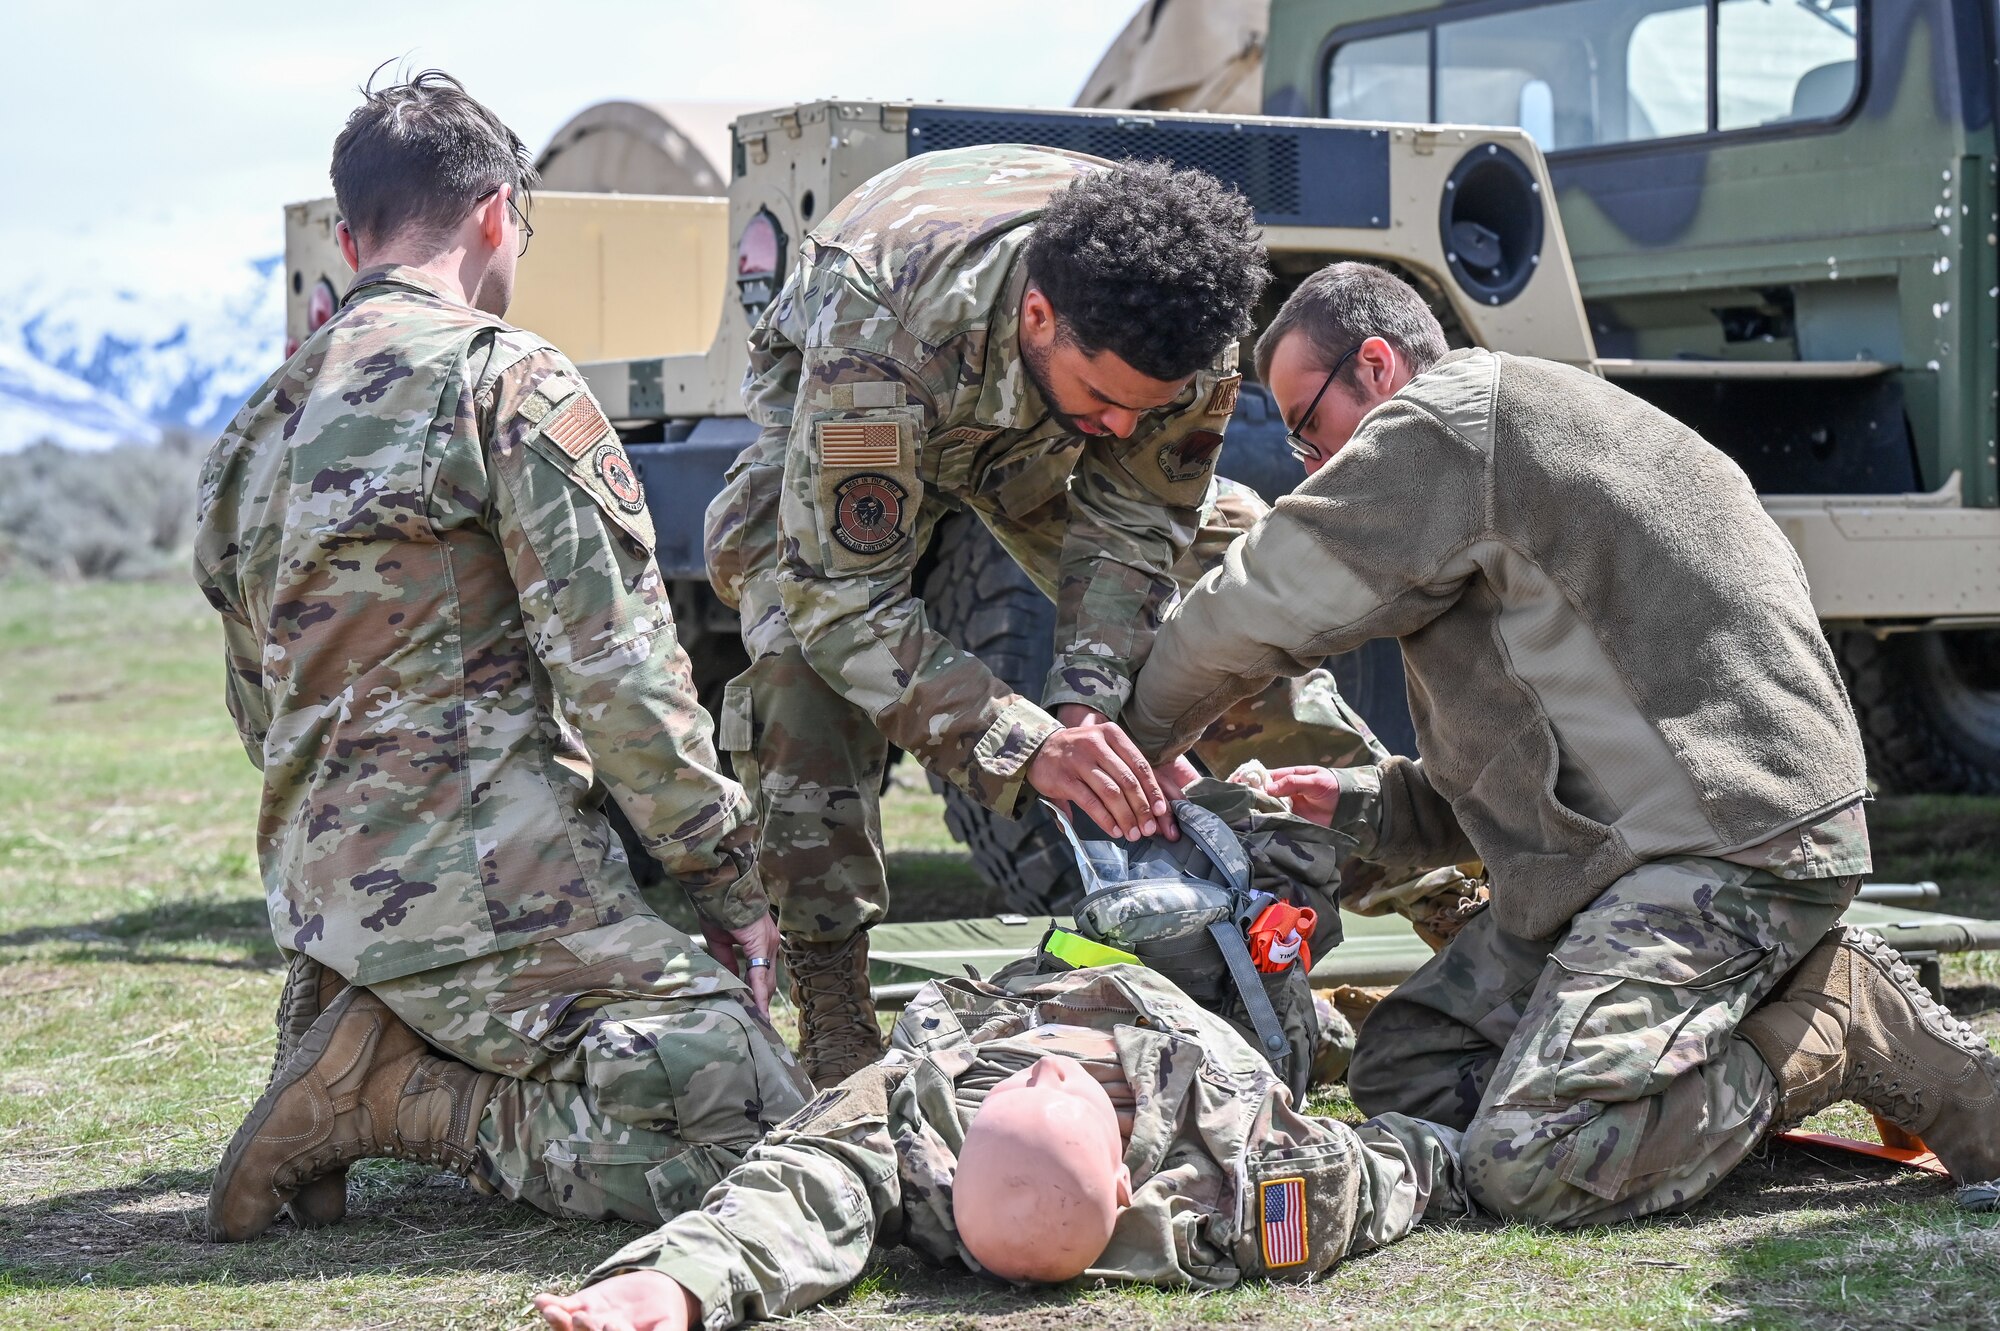 Airmen from 729th Air Control Squadron perform care-under-fire procedures during a Deployment Initial Readiness Training.